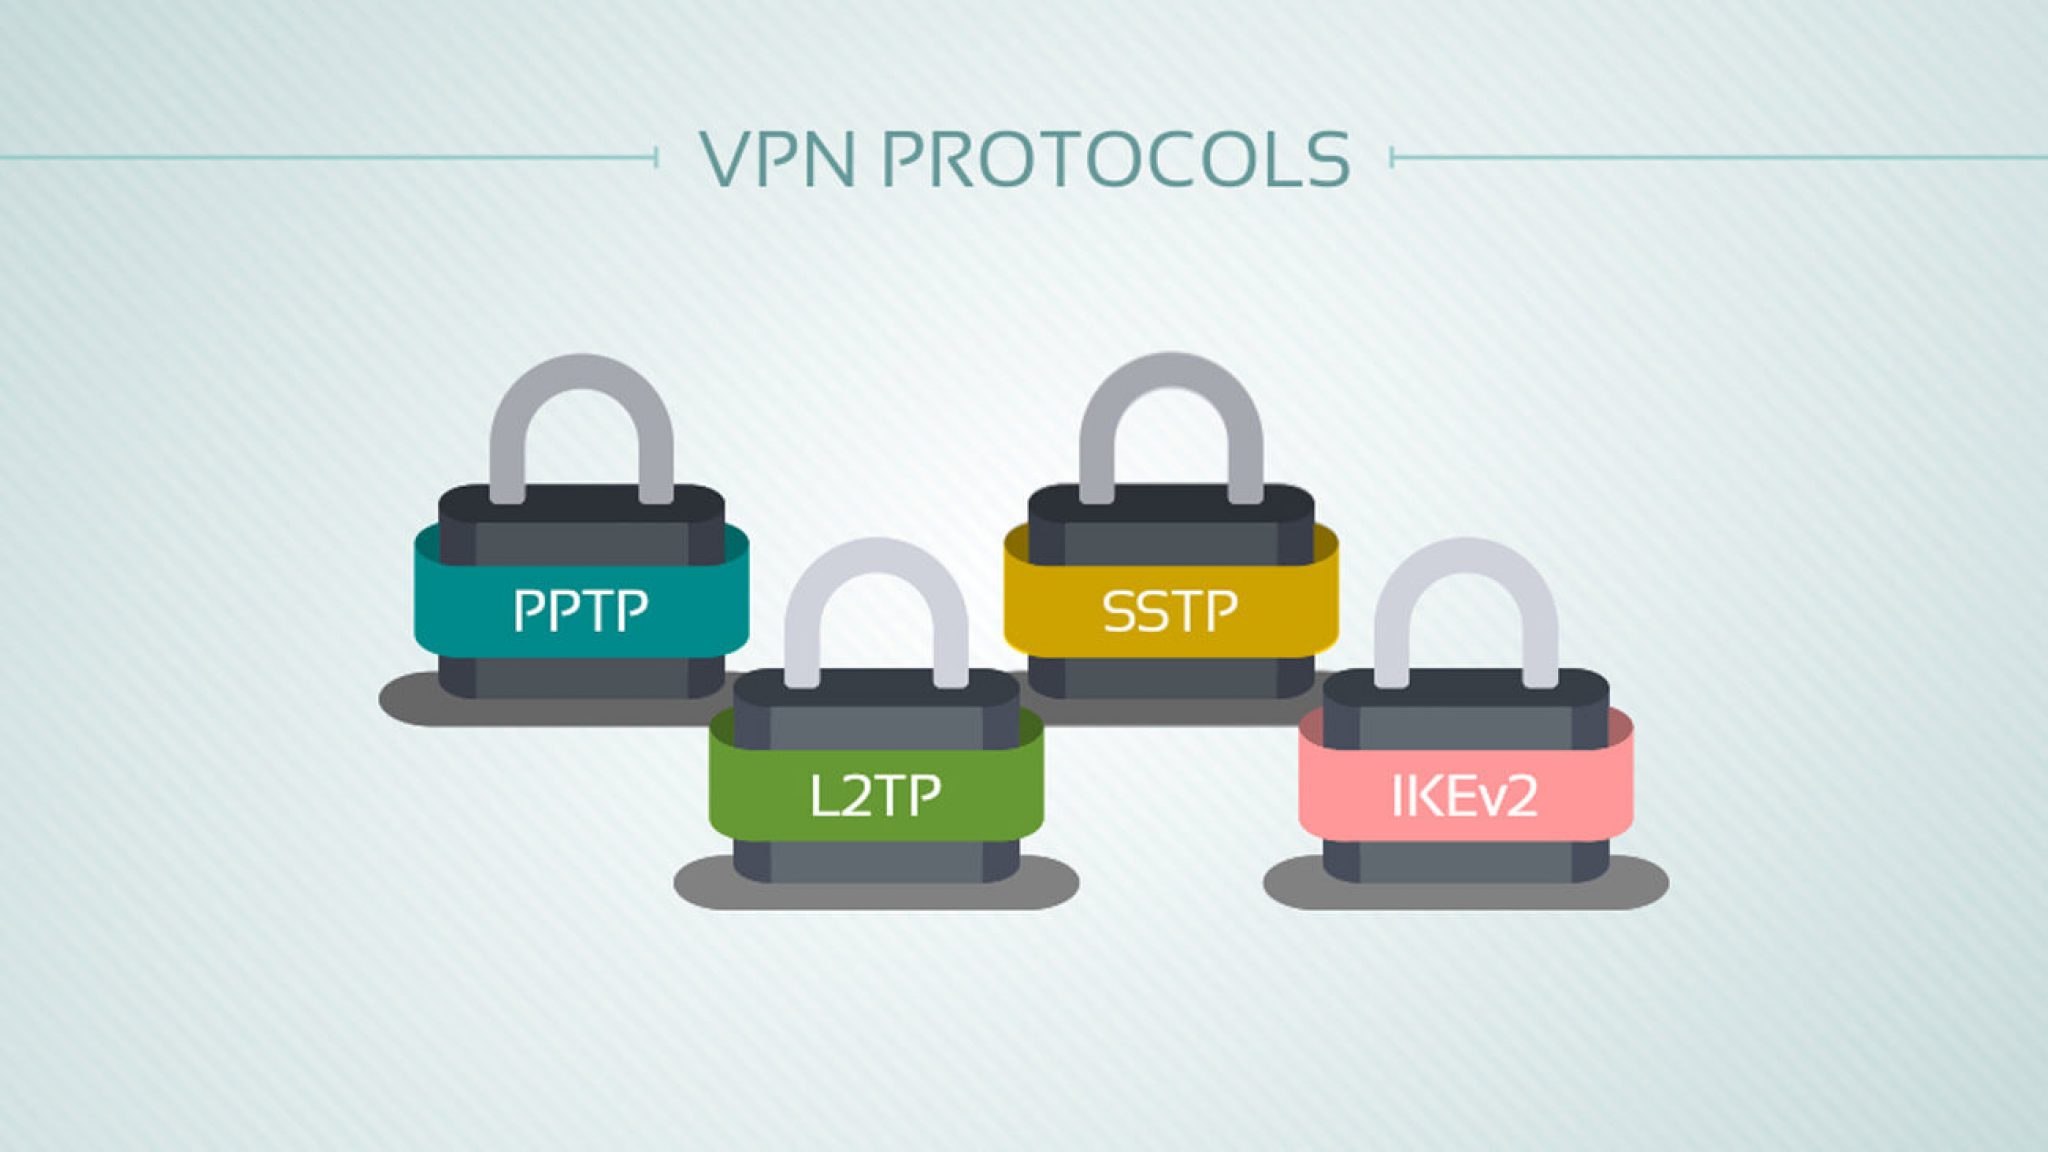 human interactive security protocols for vpn